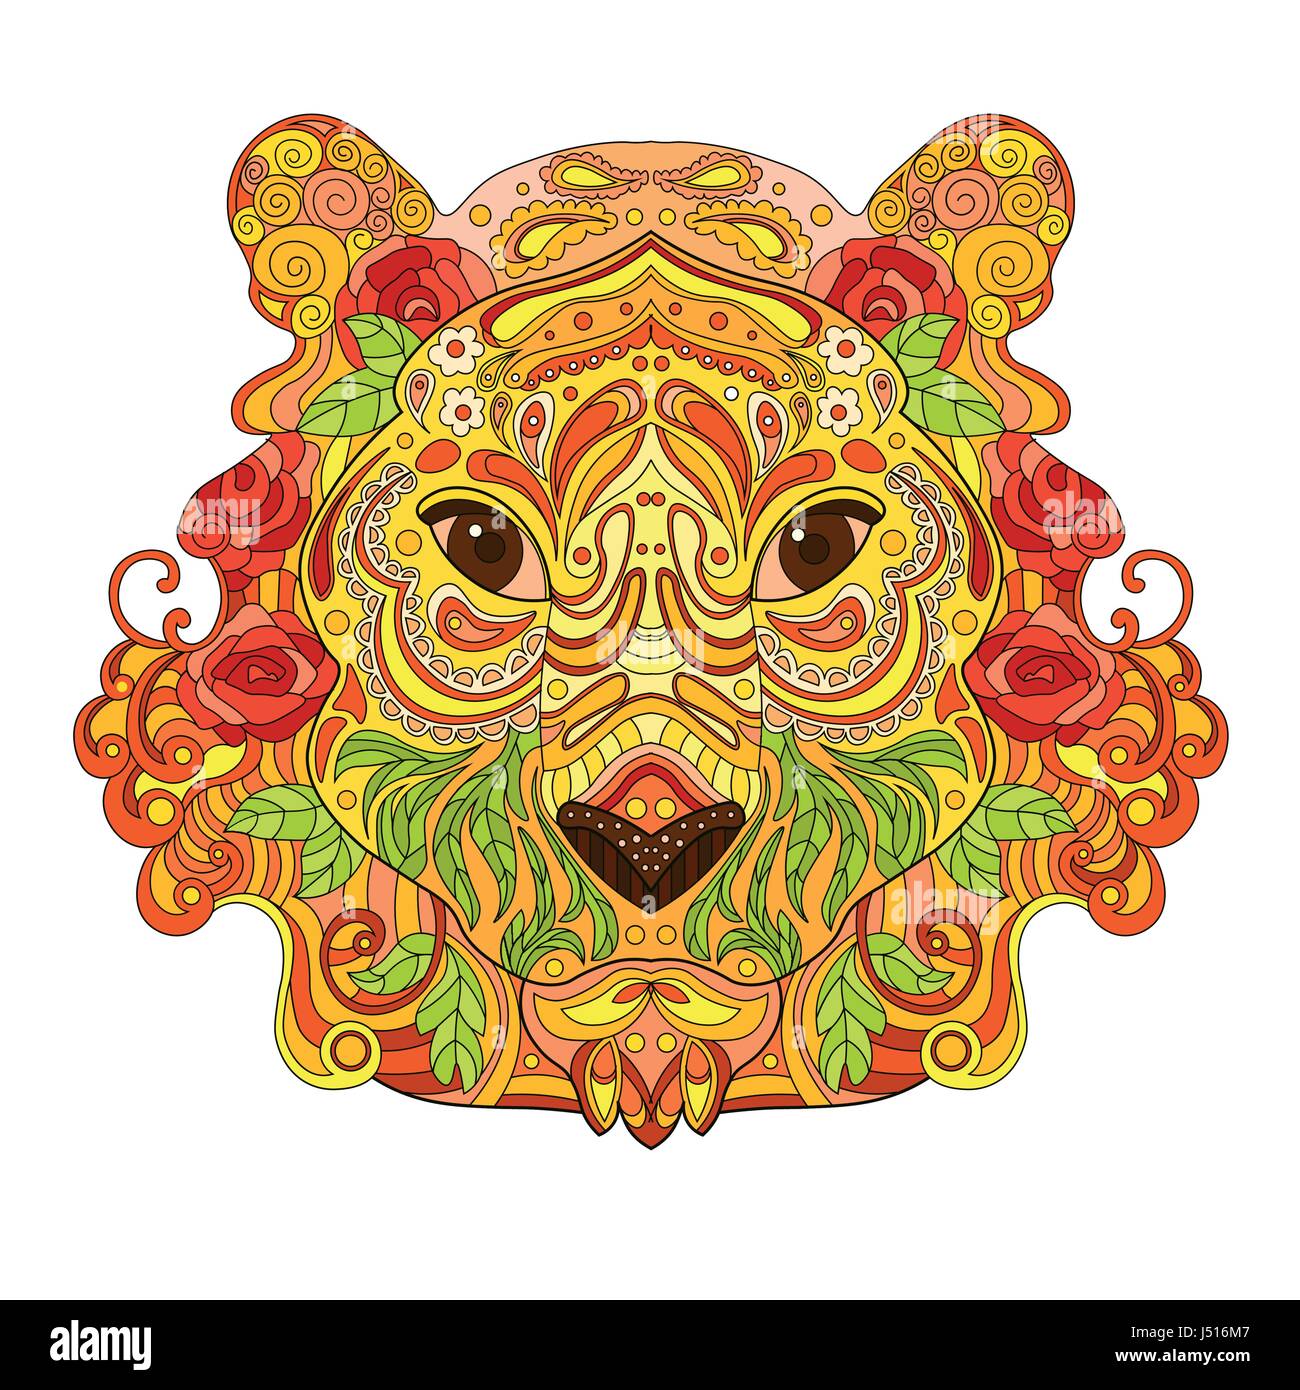 Ethnic Zentangle Ornate HandDrawn Lion Head. Painted Ink Doodle Animal Head Vector Illustration. Sketch for Tattoo, Poster, Print or t-shirt. Relaxing Stock Vector